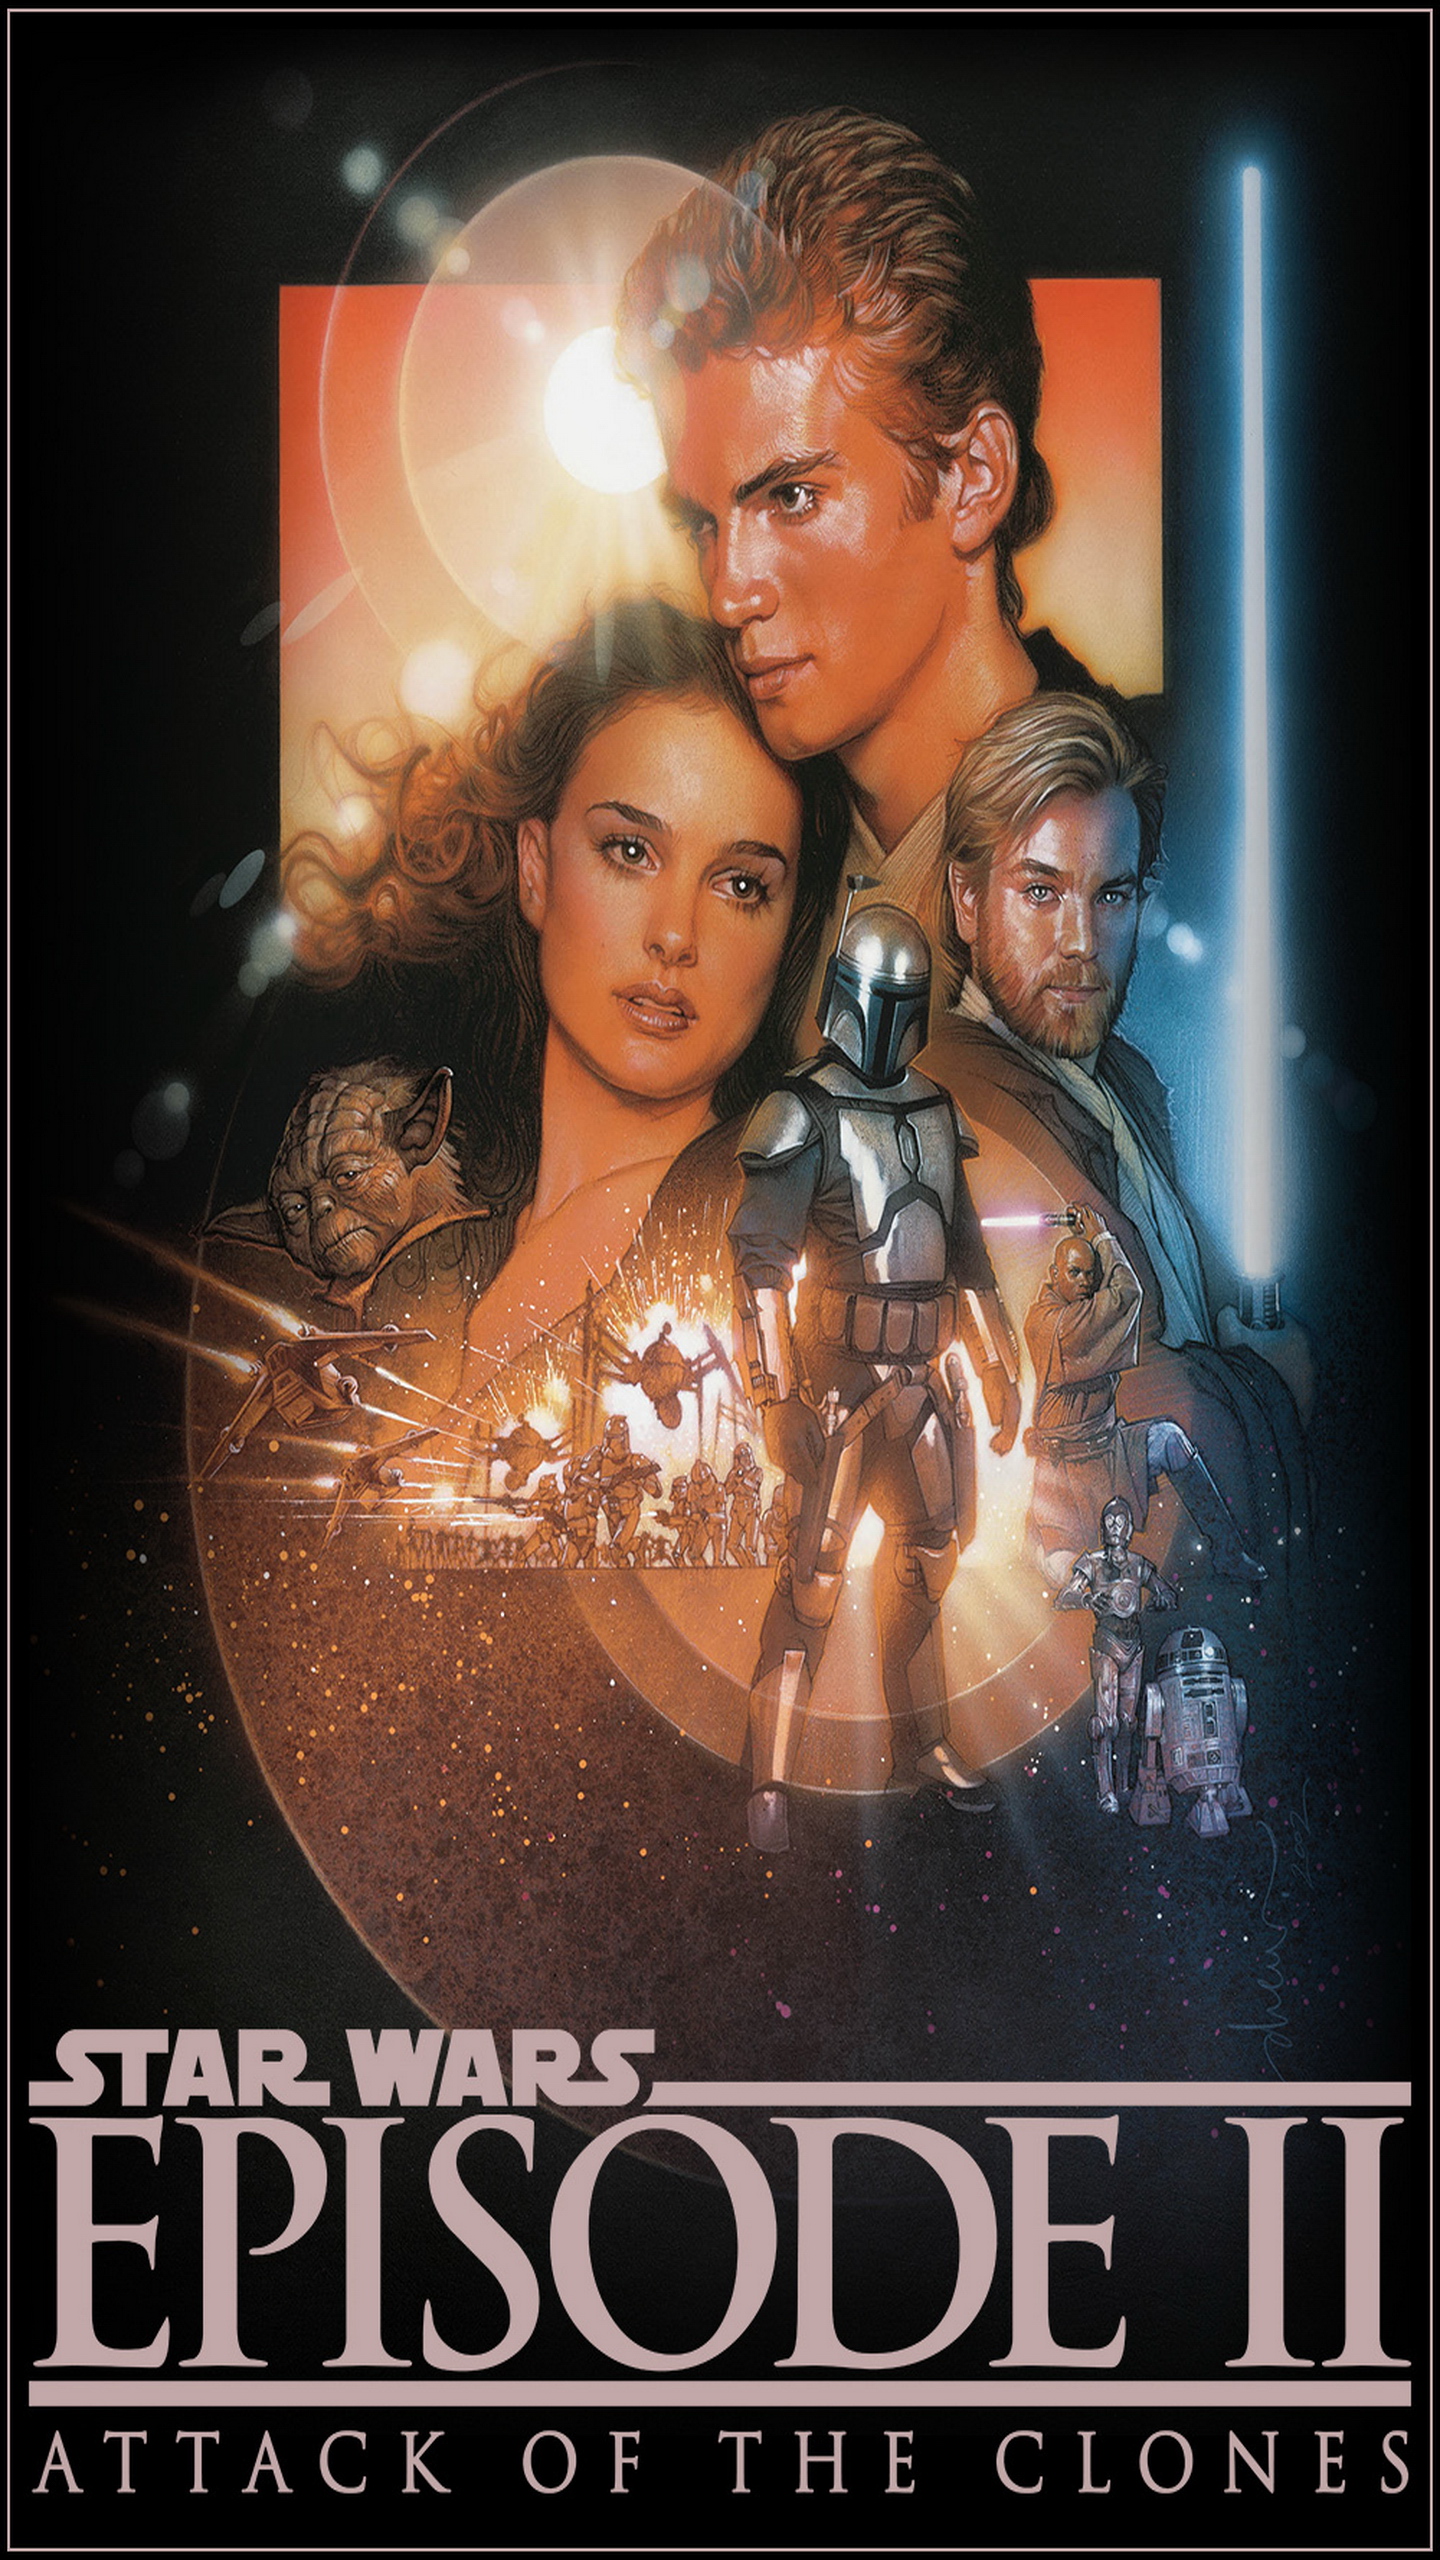 Star Wars Episode Ii Attack Of The Clones Galaxy Note Wallpaper